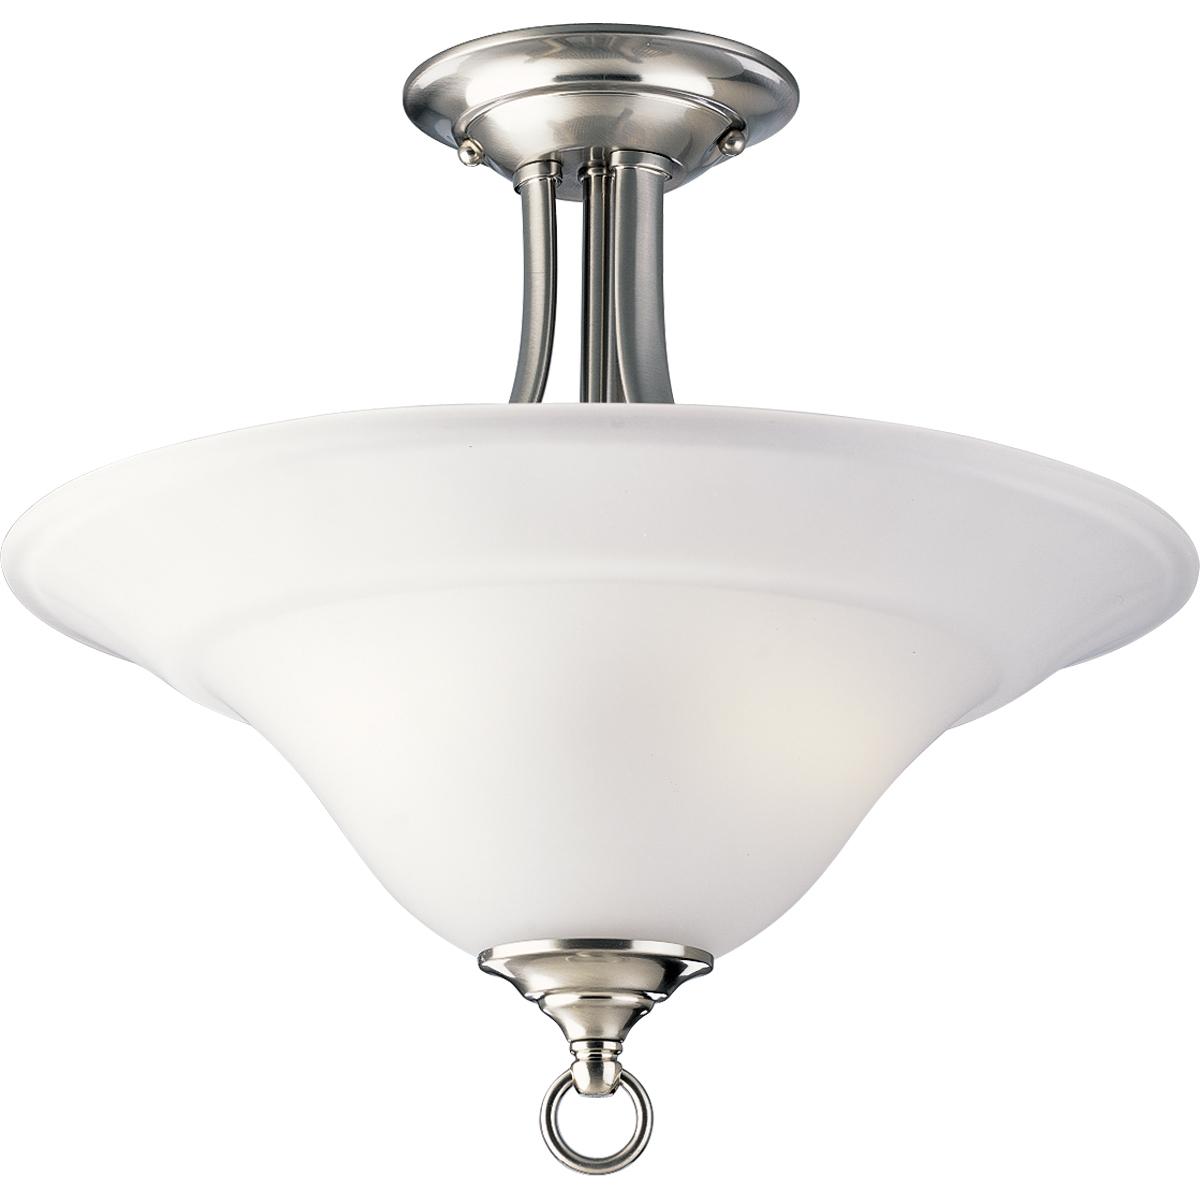 Hubbell P3473-09 Two-light semi-flush close-to-ceiling fixture featuring soft angles, curving lines and etched glass shades. Gracefully exotic, the Trinity Collection offers classic sophistication for transitional interiors. Sculptural forms of metal and glass are enhance